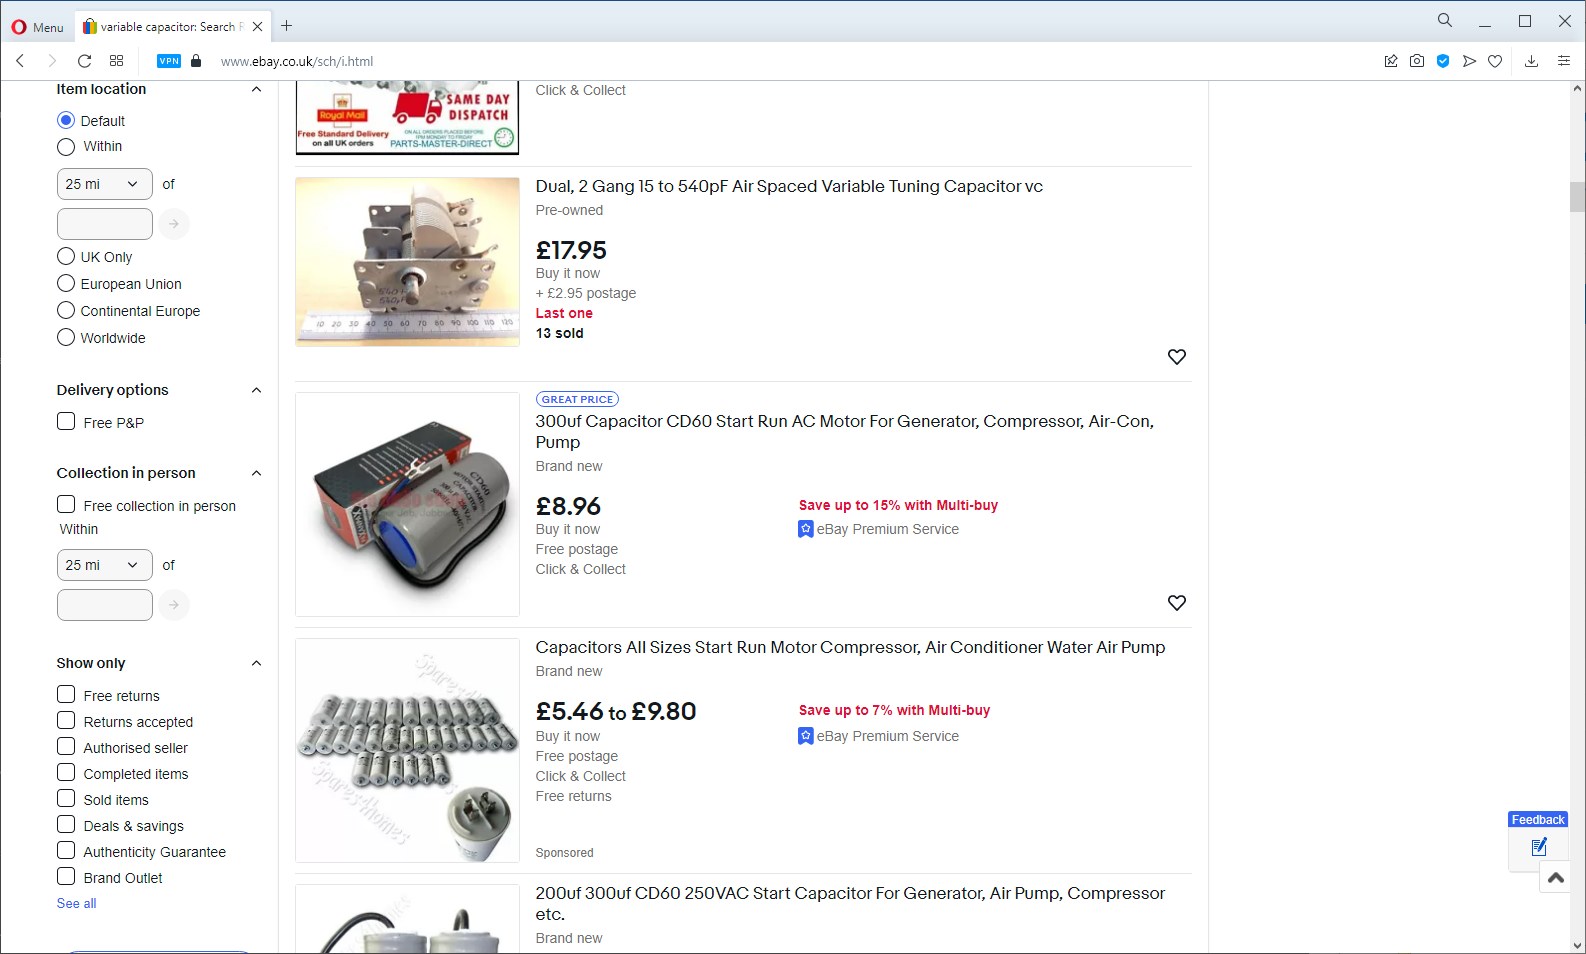 General eBay site search for "Variable
              Capacitor"